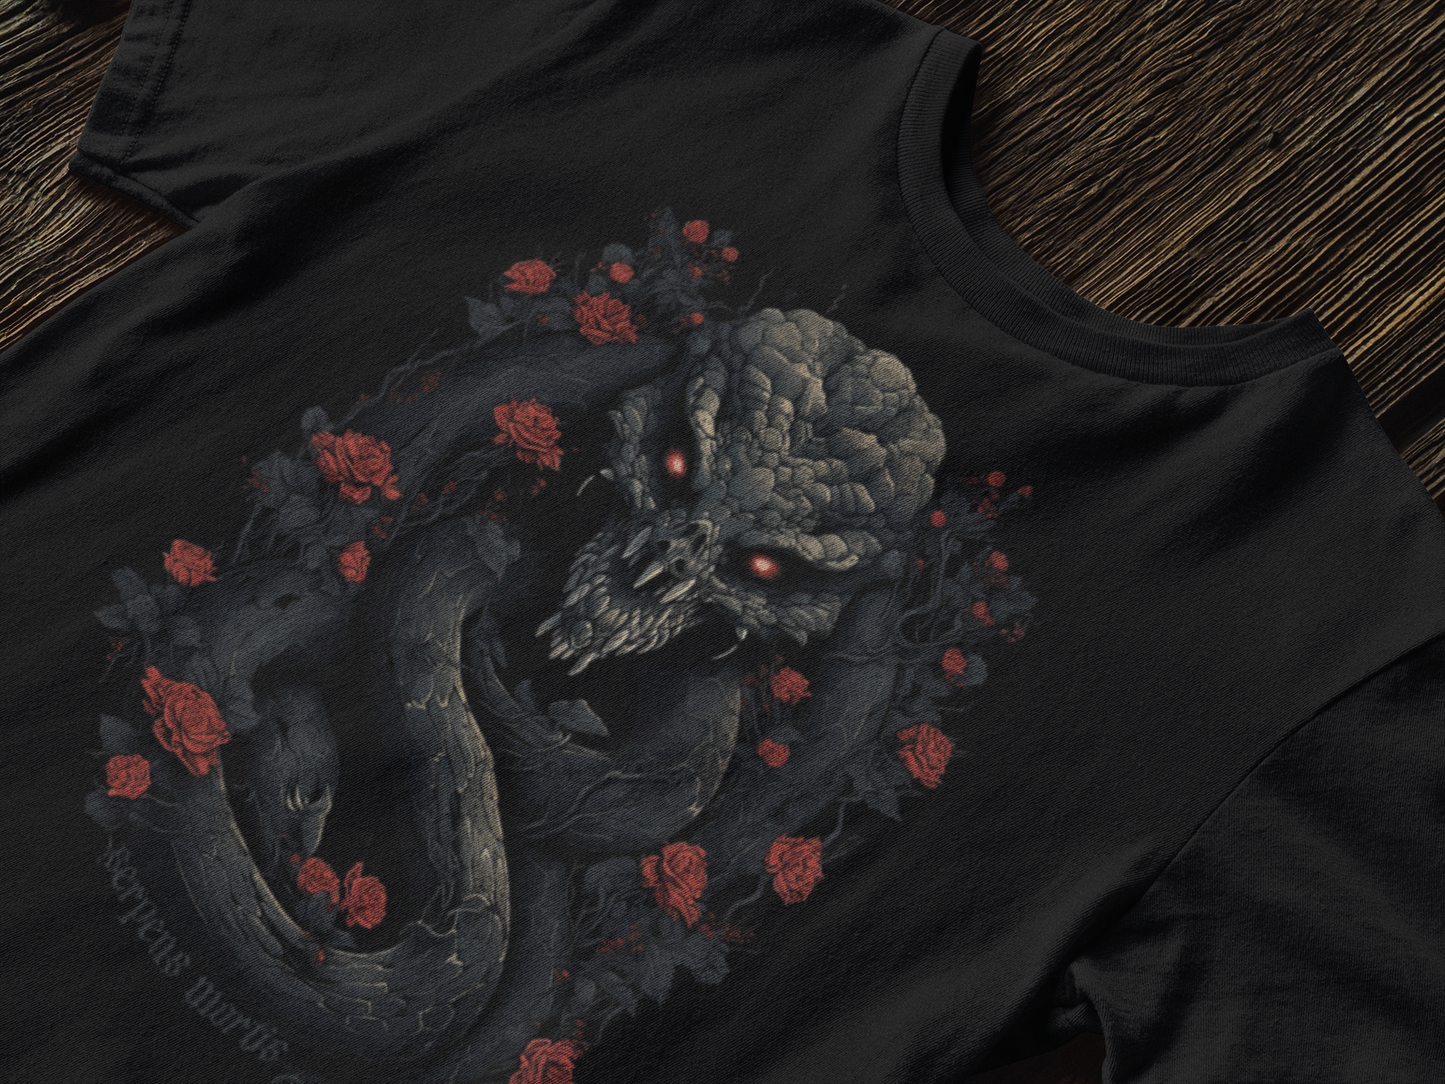 Serpens Mortis Serpent of Death T-shirt by Hellhound Clothing